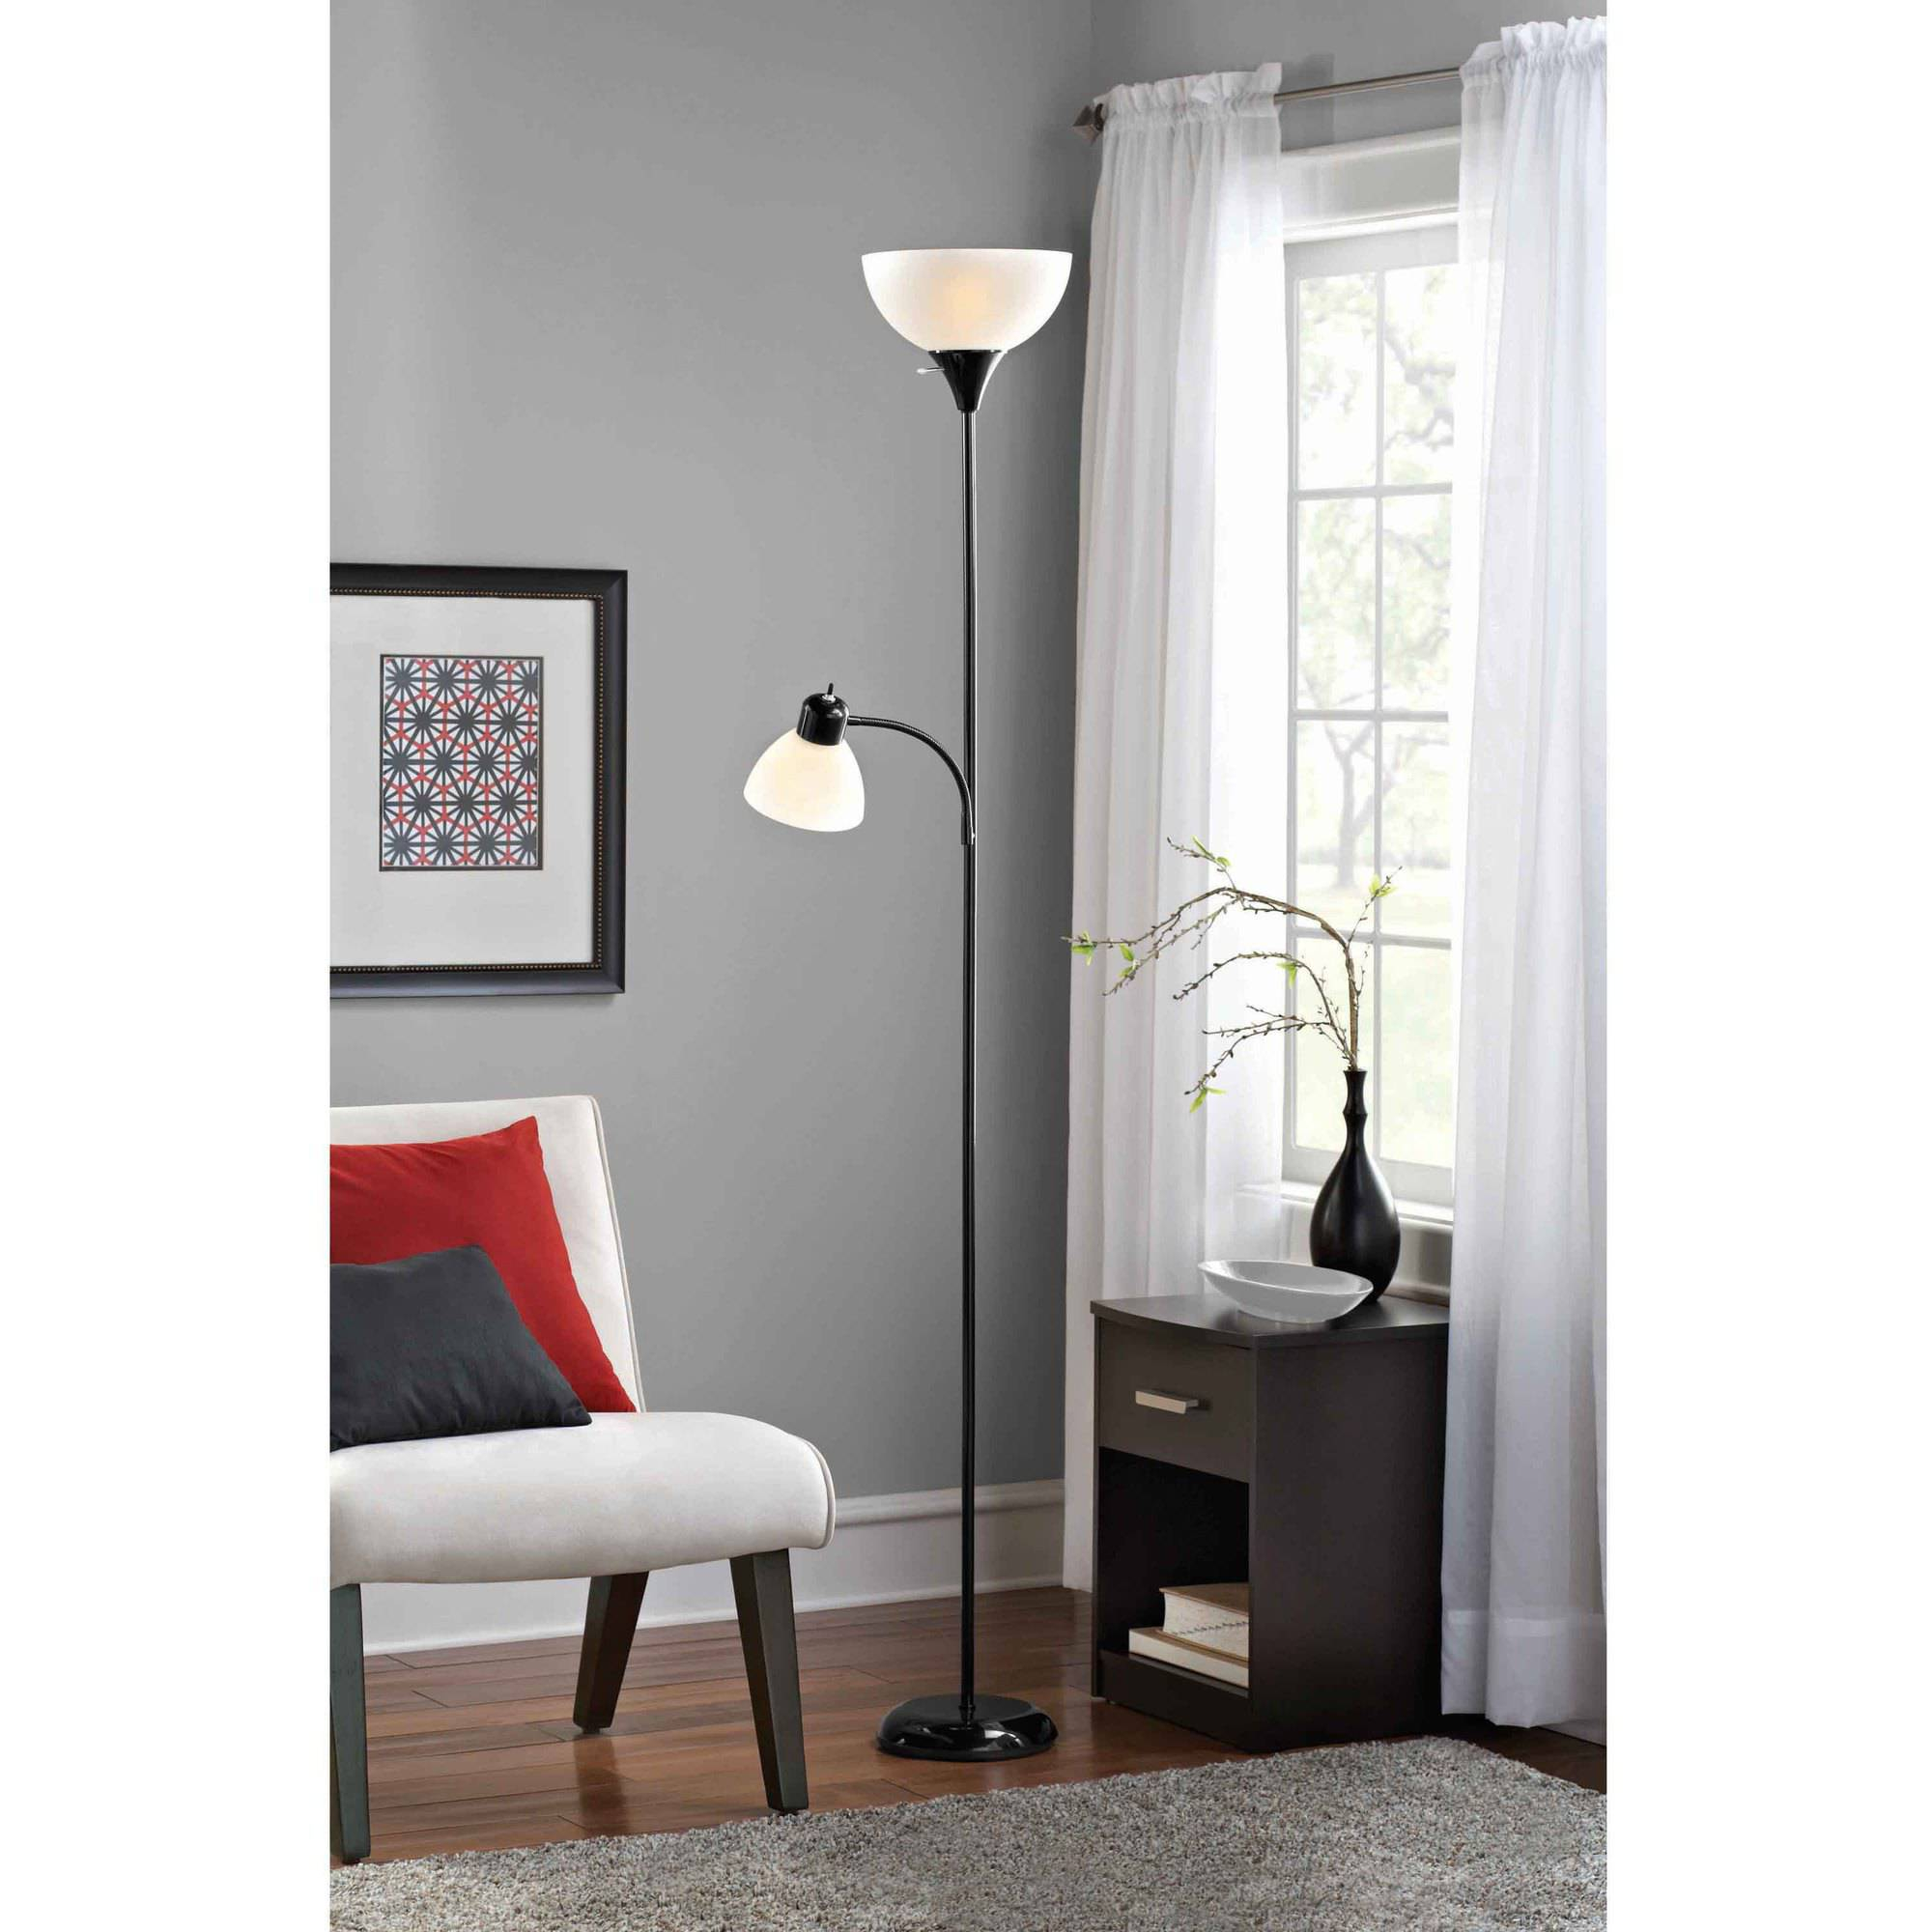 Mainstays Combo Floor Lamp With Bulbs Included Walmart inside sizing 2000 X 2000